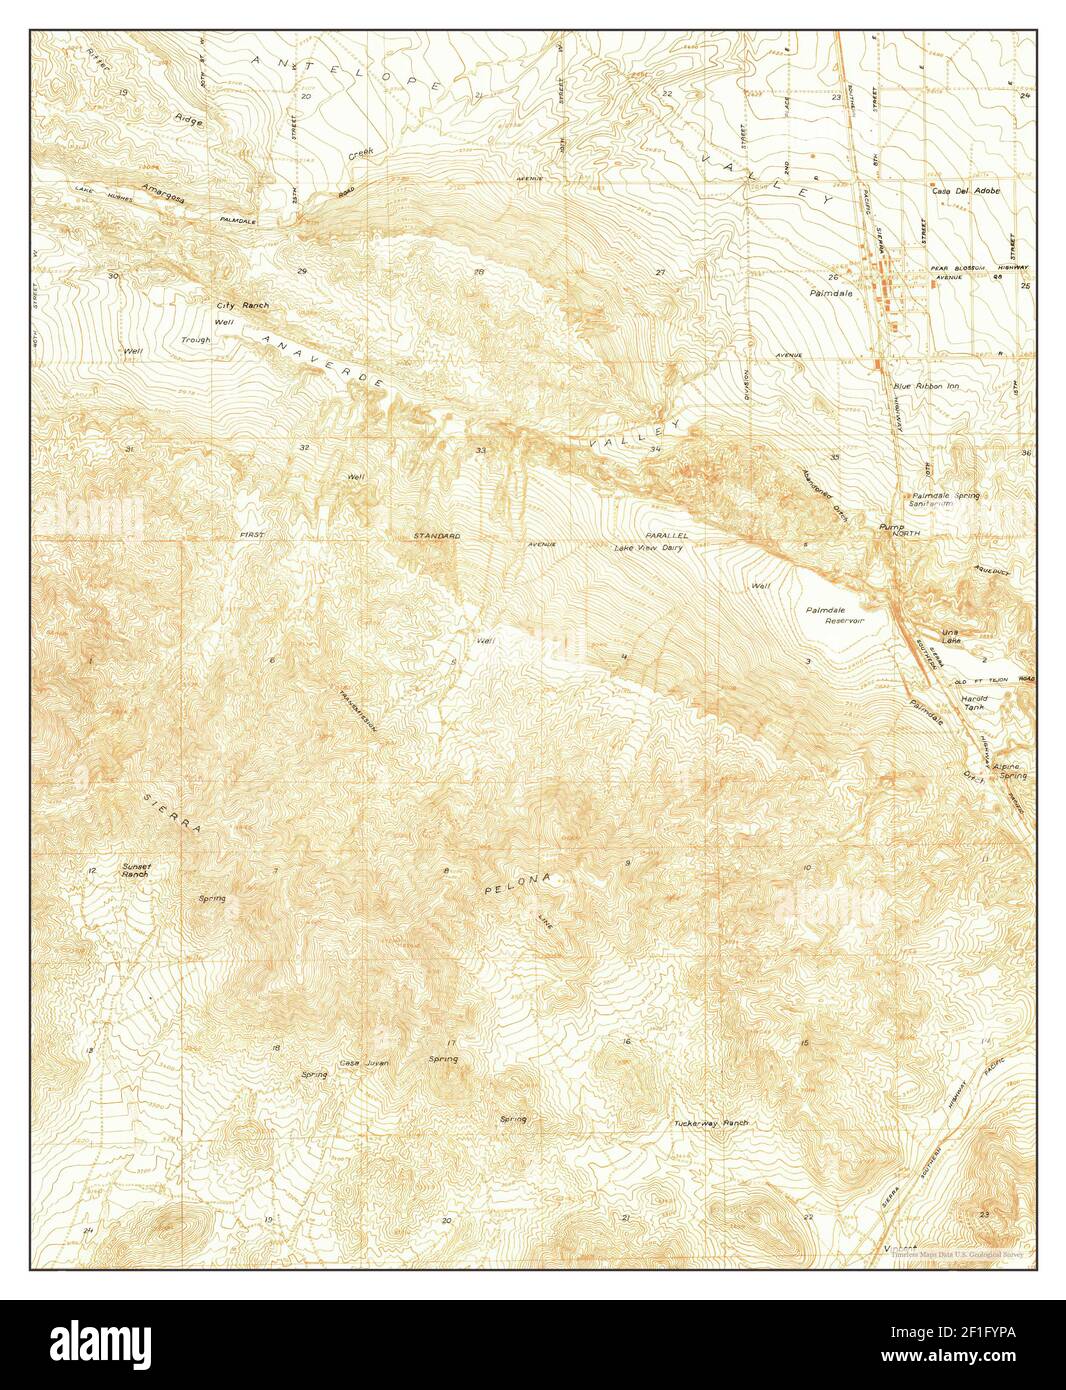 Palmdale, California, map 1932, 1:24000, United States of America by Timeless Maps, data U.S. Geological Survey Stock Photo